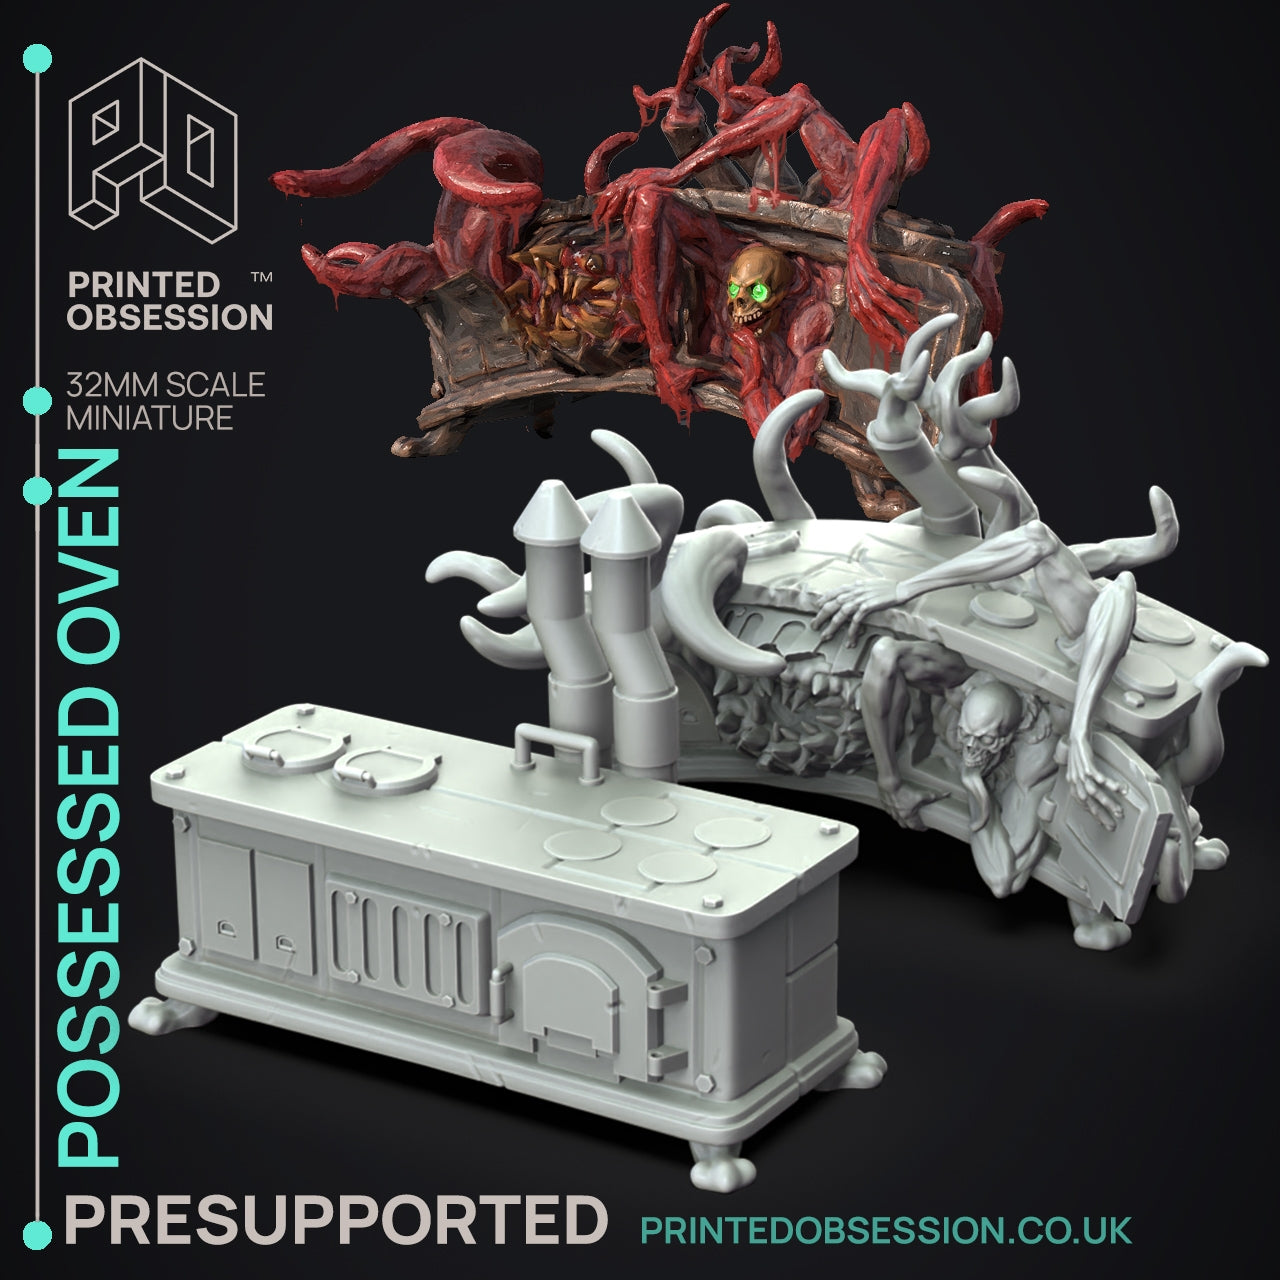 Possessed Ovens - The Possessed Bakery - The Printed Obsession - Table-top mini, 3D Printed Collectable for painting and playing!